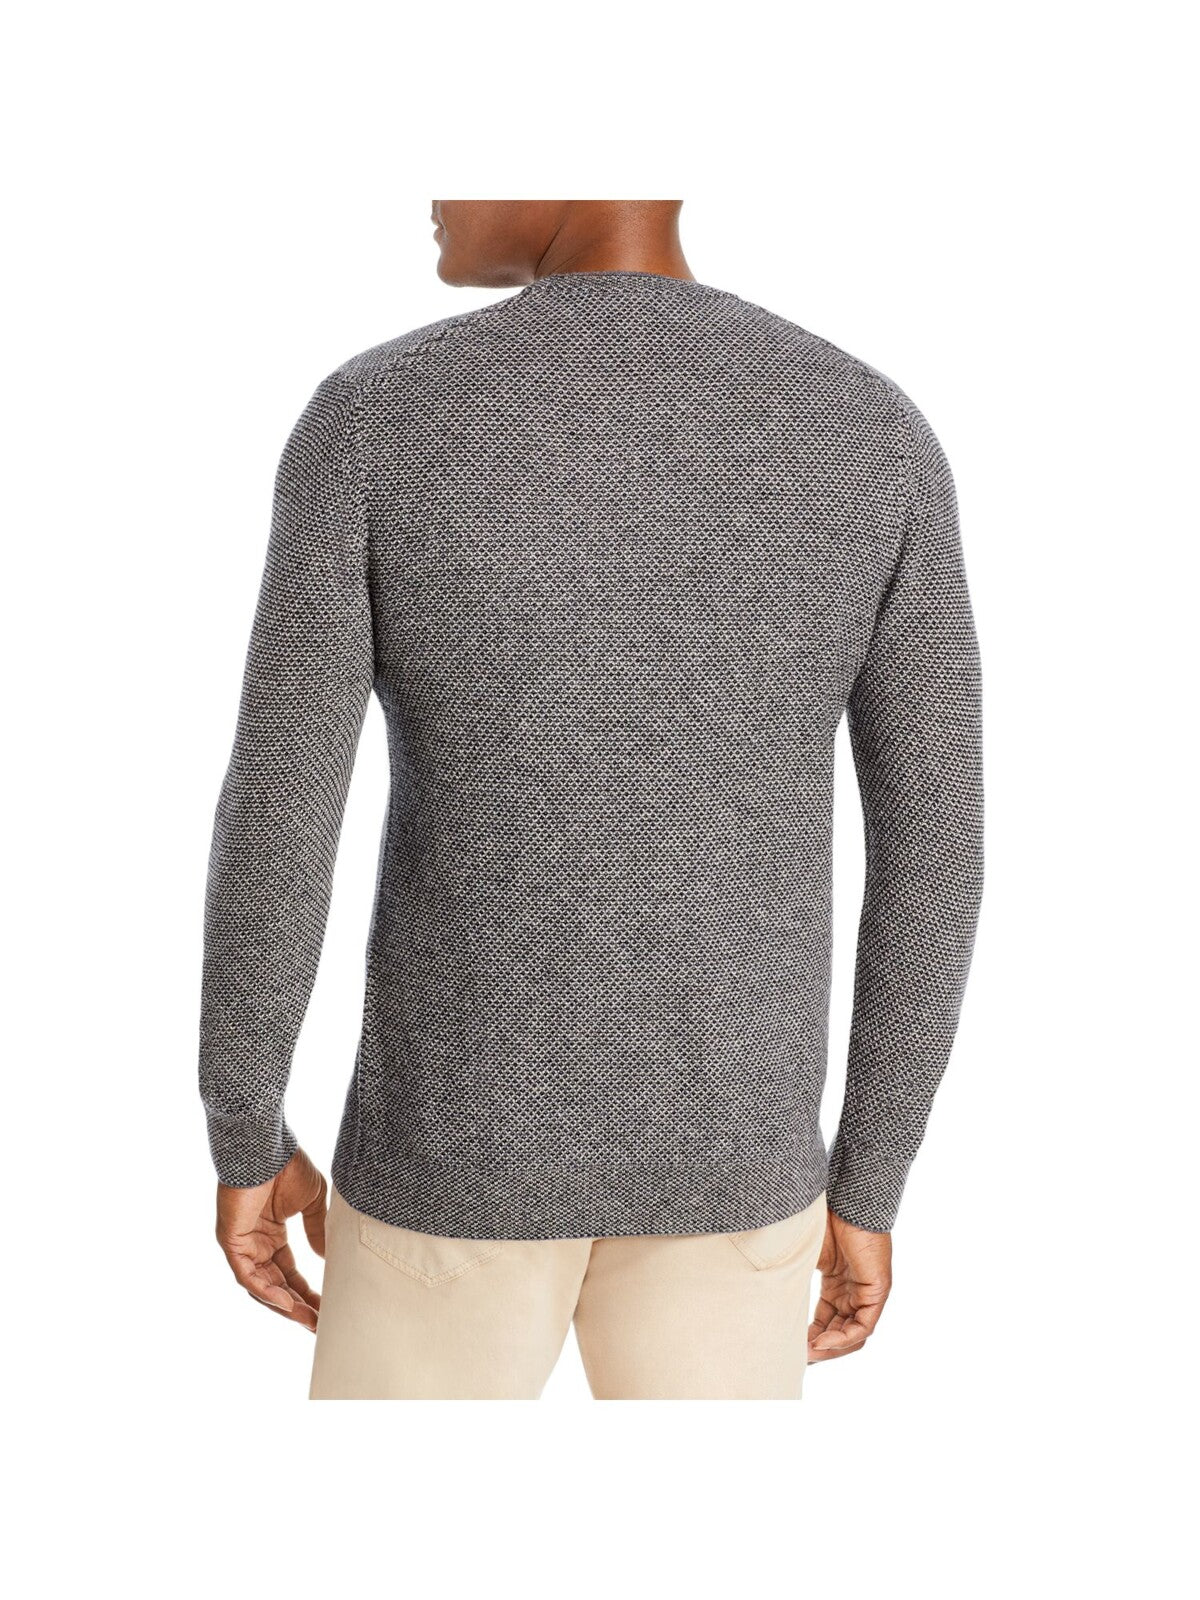 THE MENS STORE Mens Gray Patterned Crew Neck Knit Pullover Sweater XXL